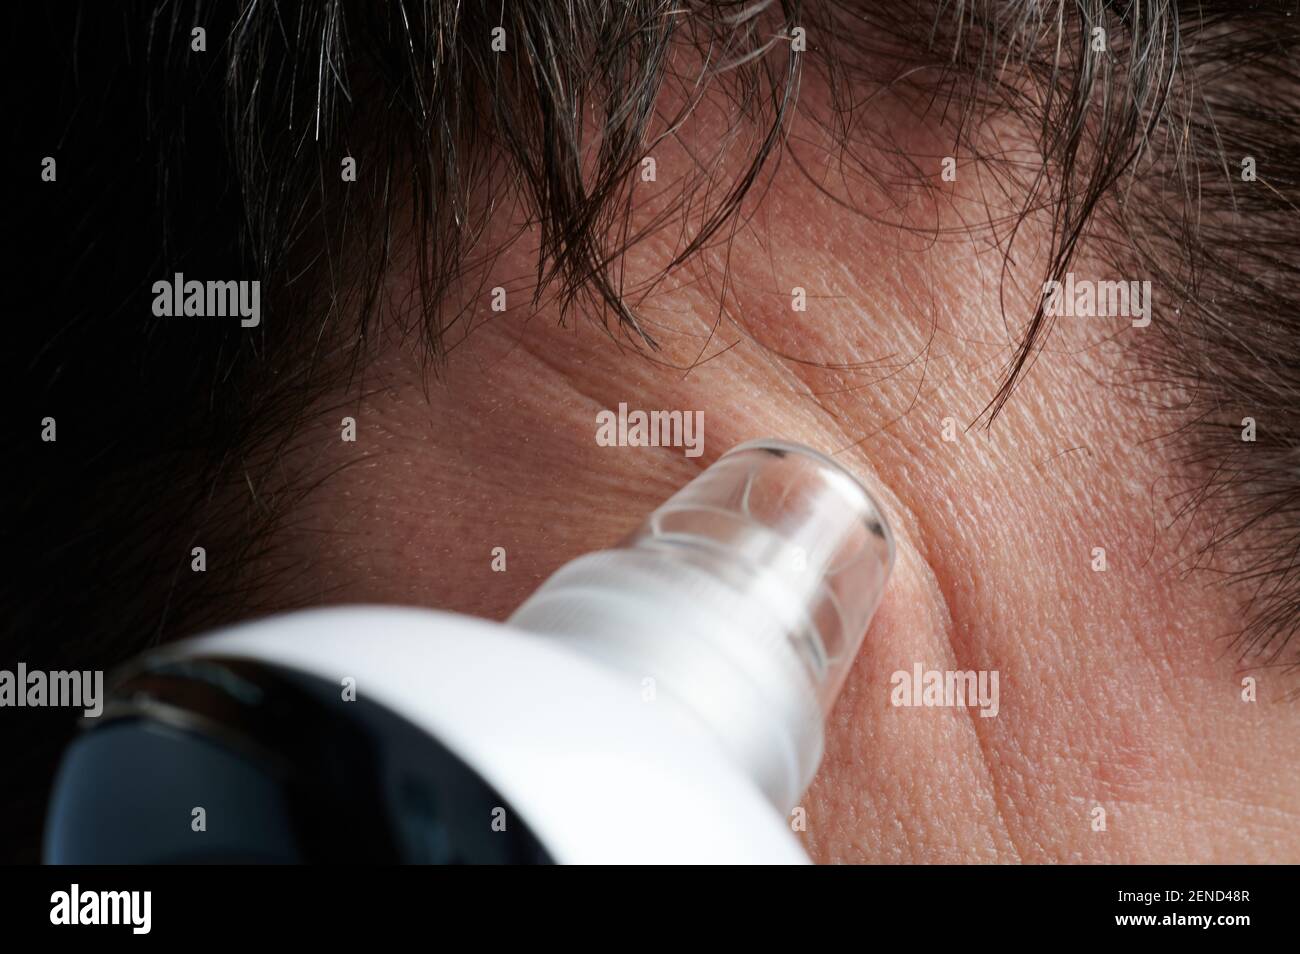 Cleaning forehead skin from blackheads macro close up view Stock Photo